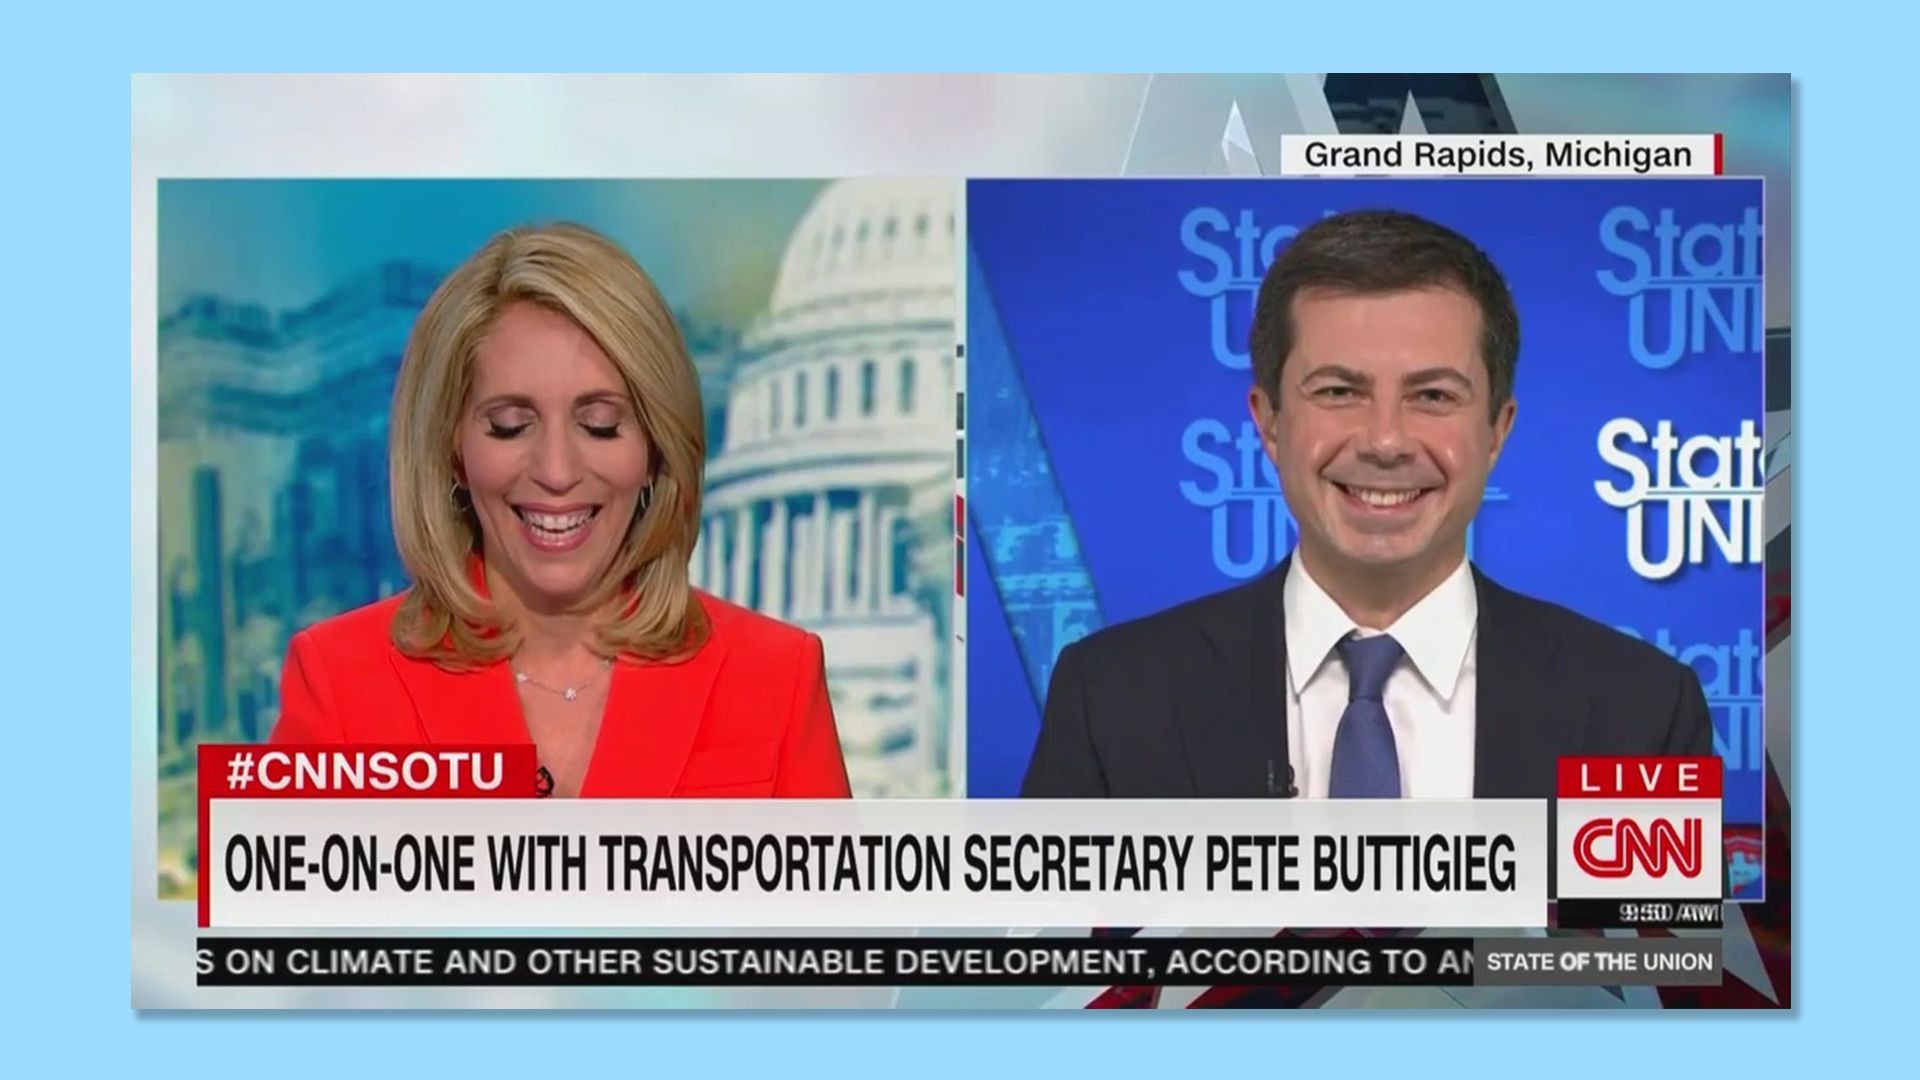 CNN's Dana Bash and Transportation Secretary Pete Buttigieg are seen laughing as they discuss his children's first Halloween costume.